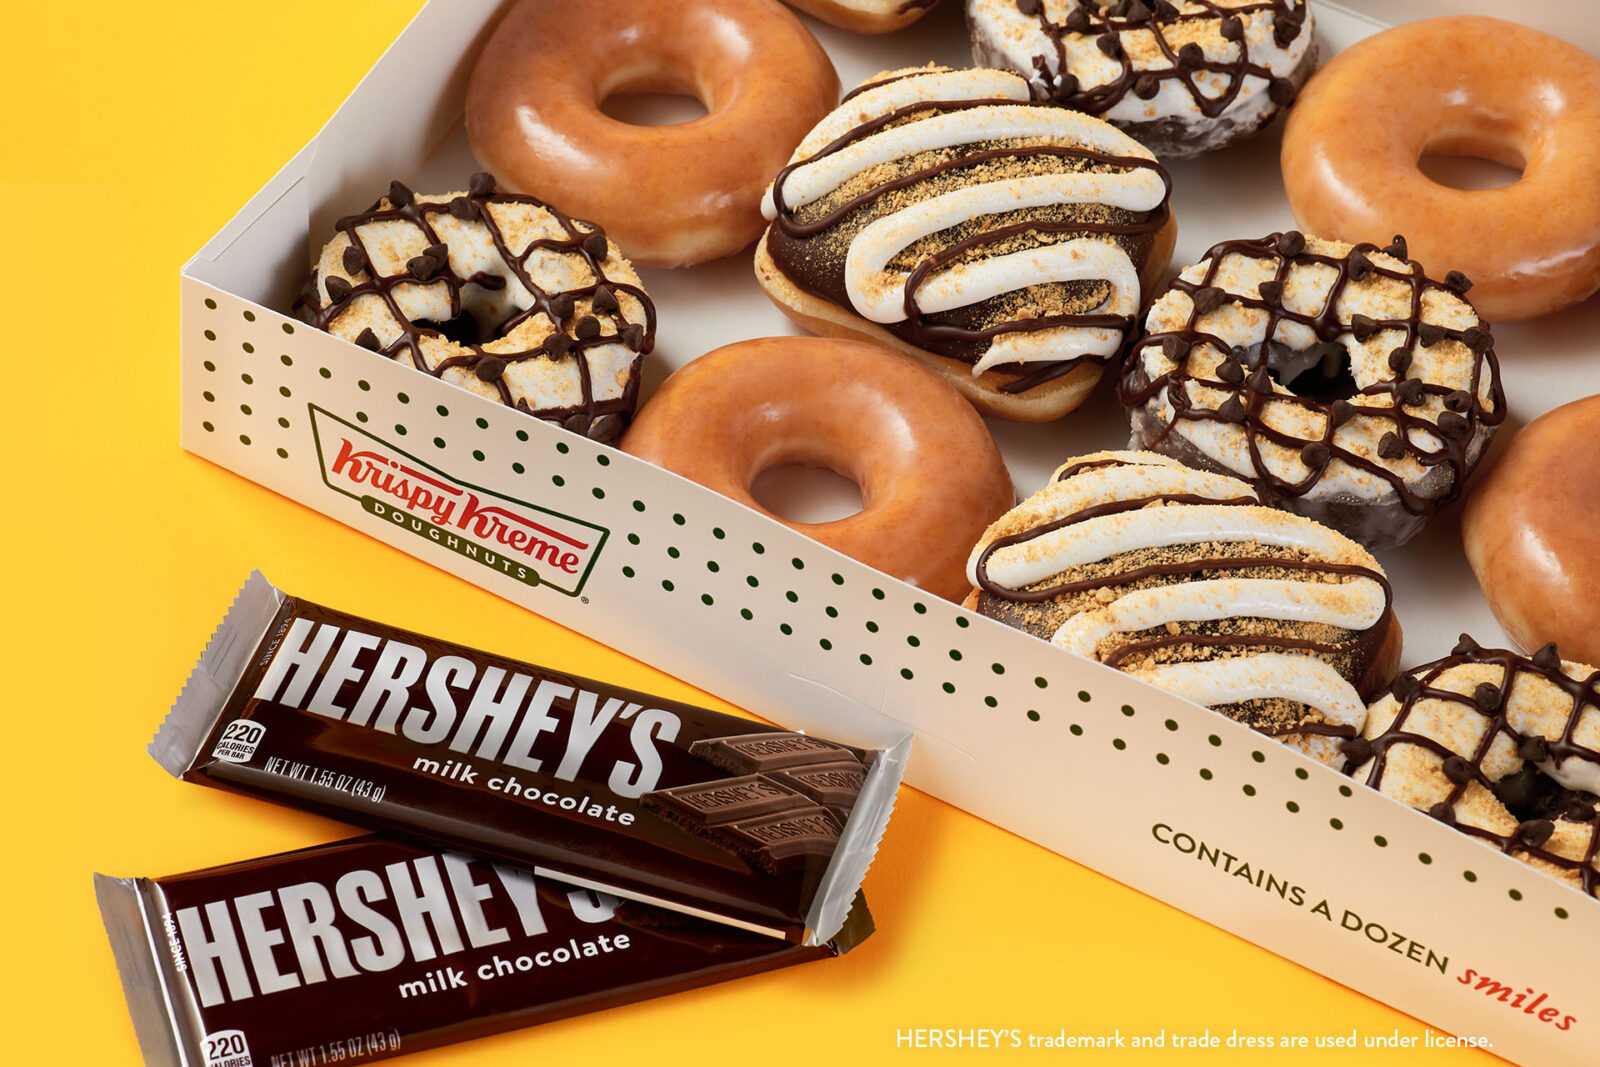 Give Me S’more: Krispy Kreme introduces Hershey’s S'mores Doughnuts.